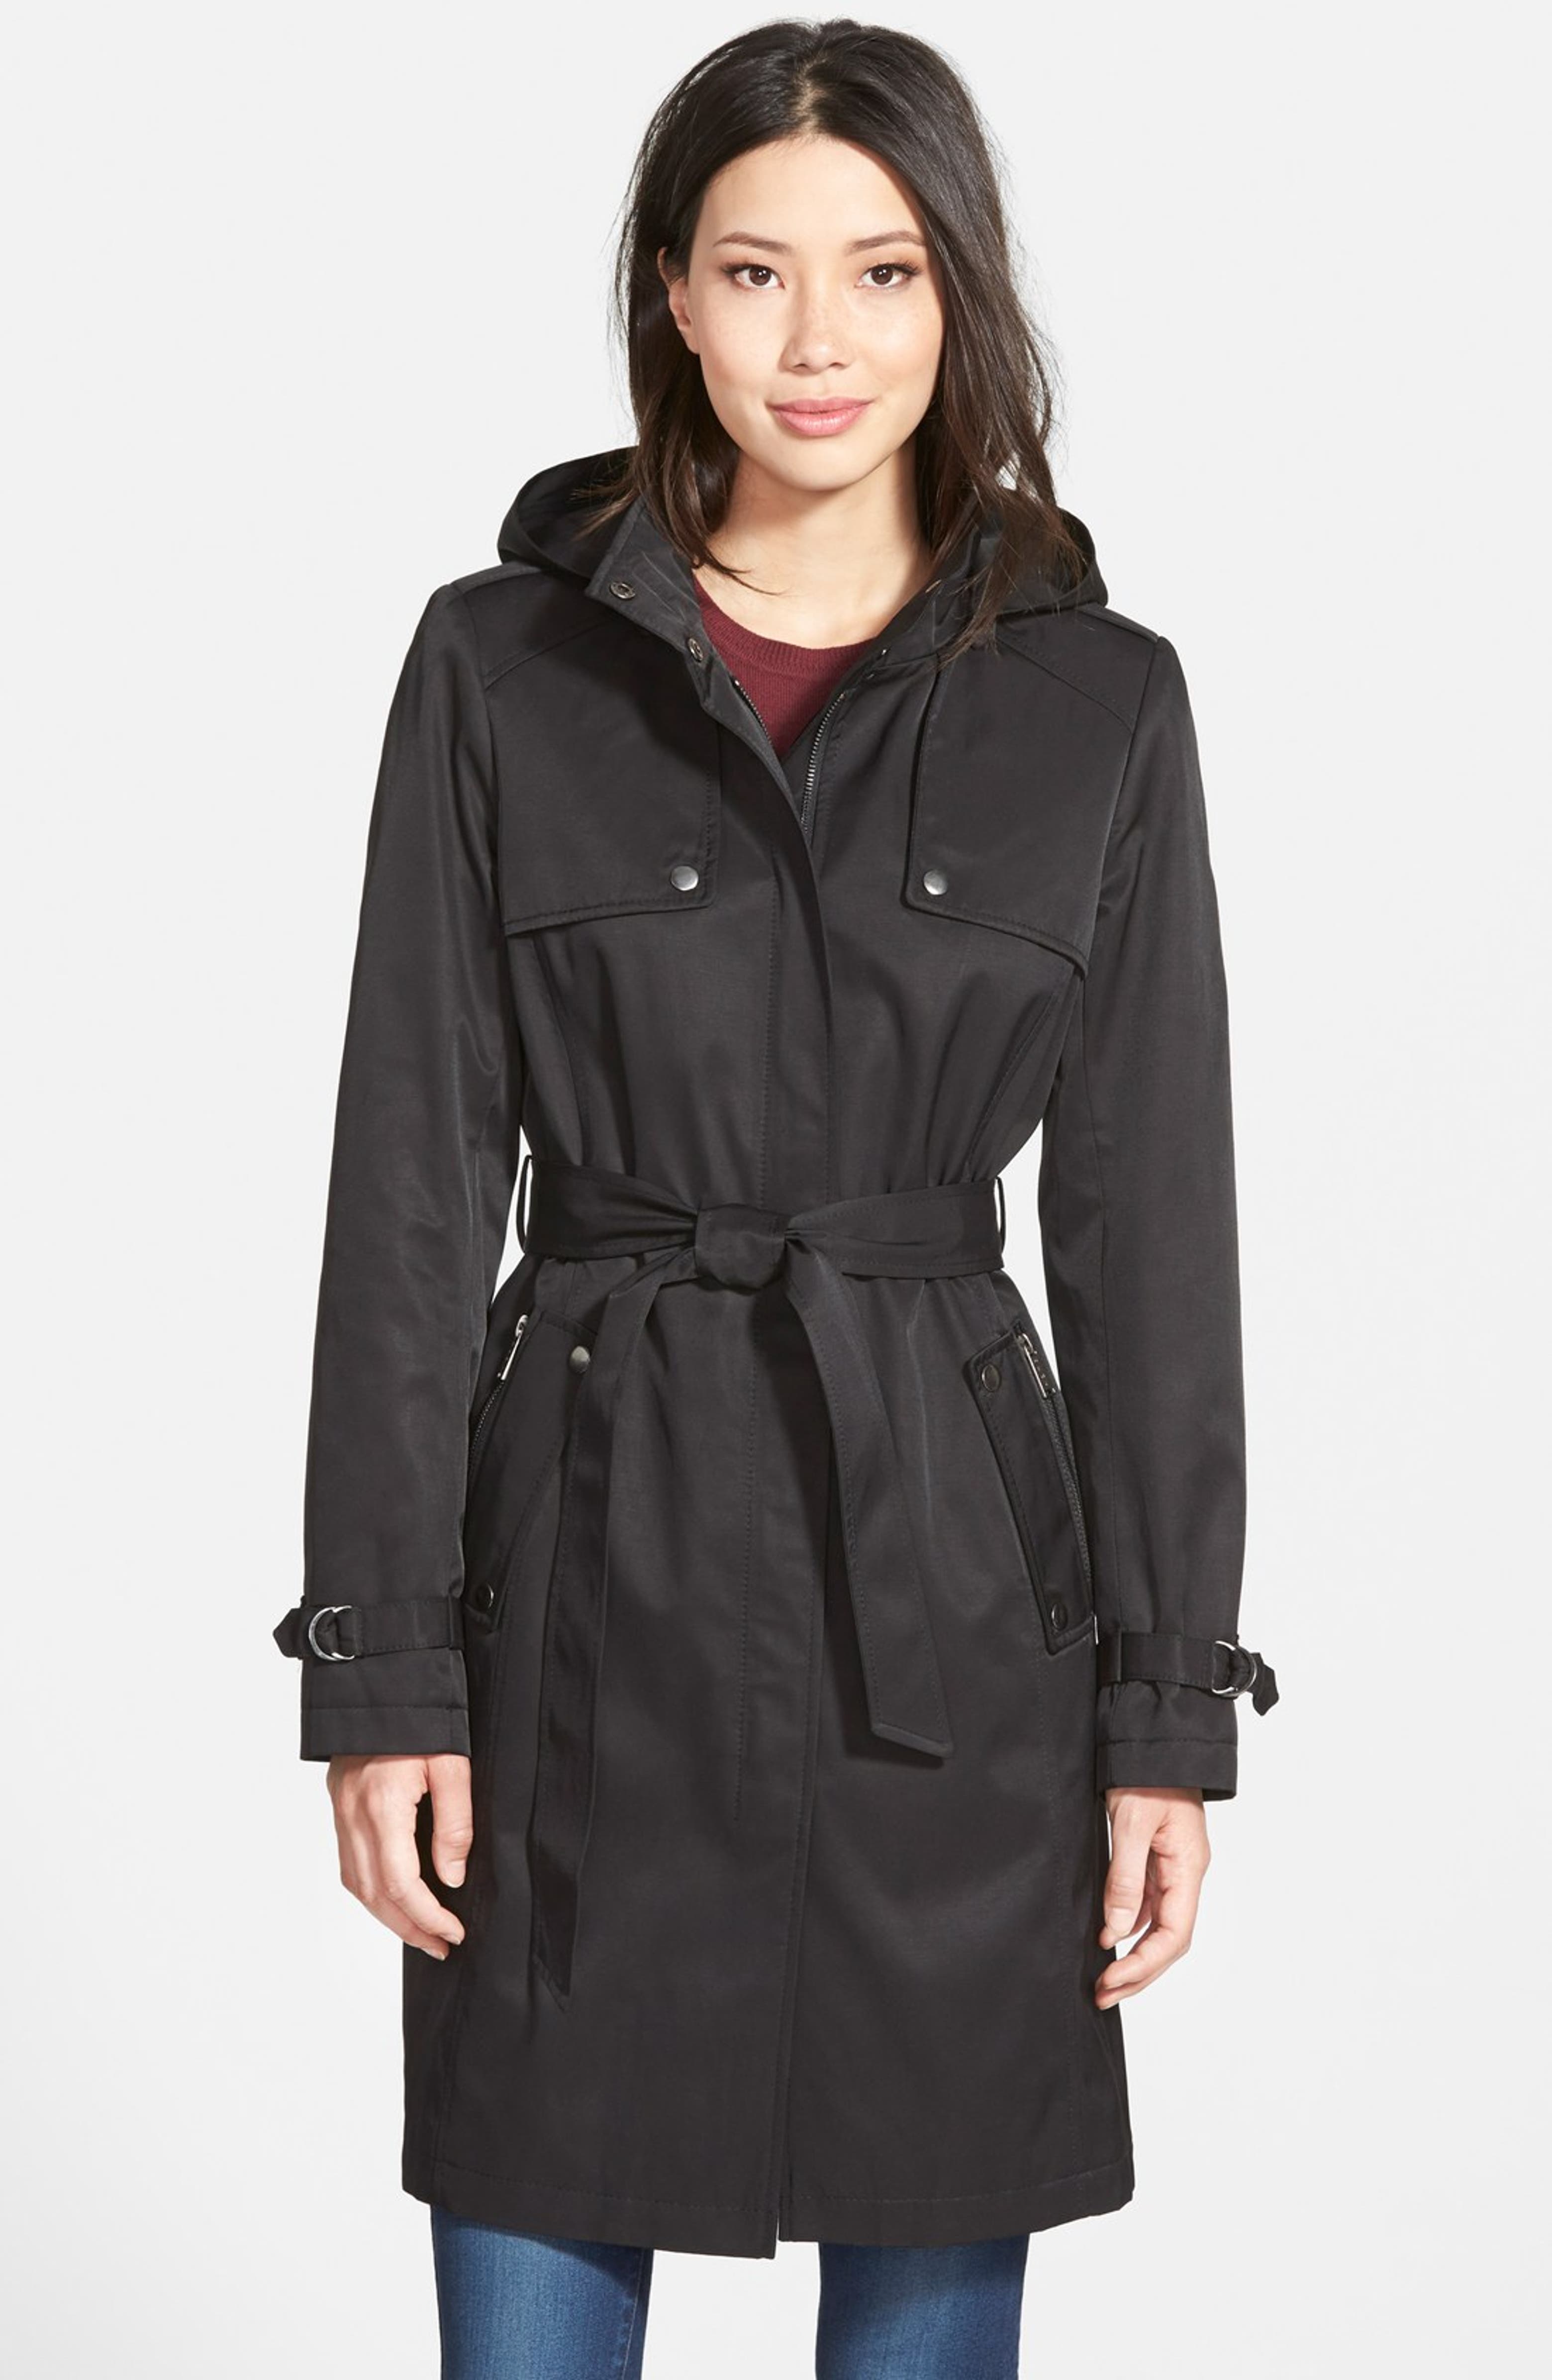 DKNY Single Breasted Trench Coat with Detachable Hood | Nordstrom